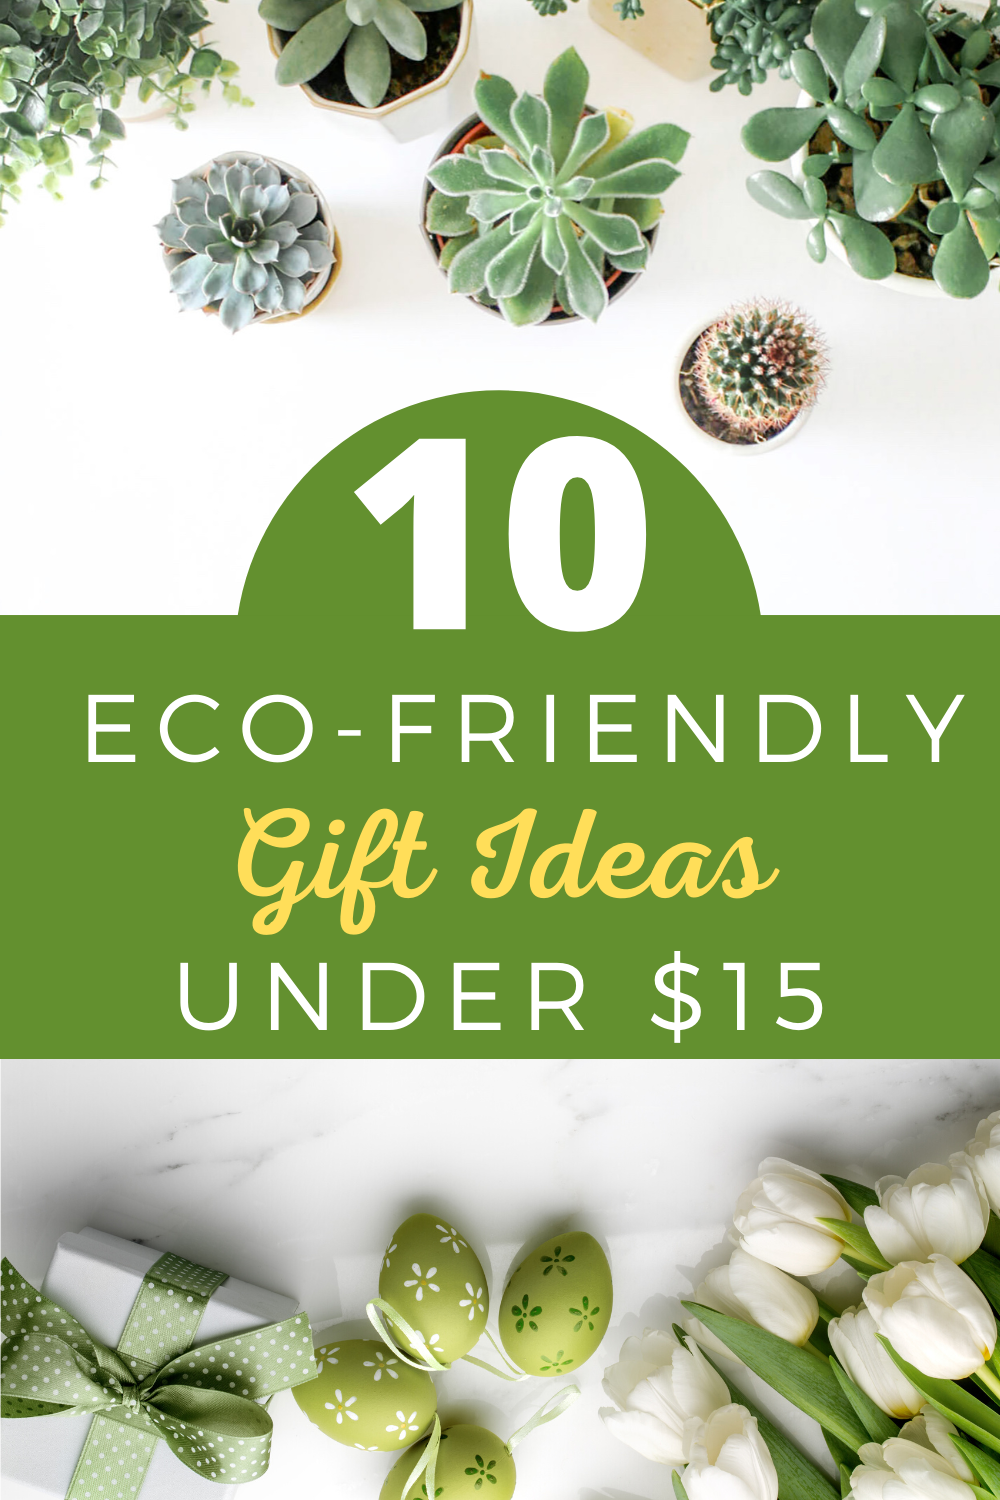 We’ve gathered 10 cheap eco-friendly gifts that are all under $15. The eco warriors in your life will love these gifts for any holiday or celebration like christmas, birthdays, or any other gift giving occasion. - A Little Sustainability